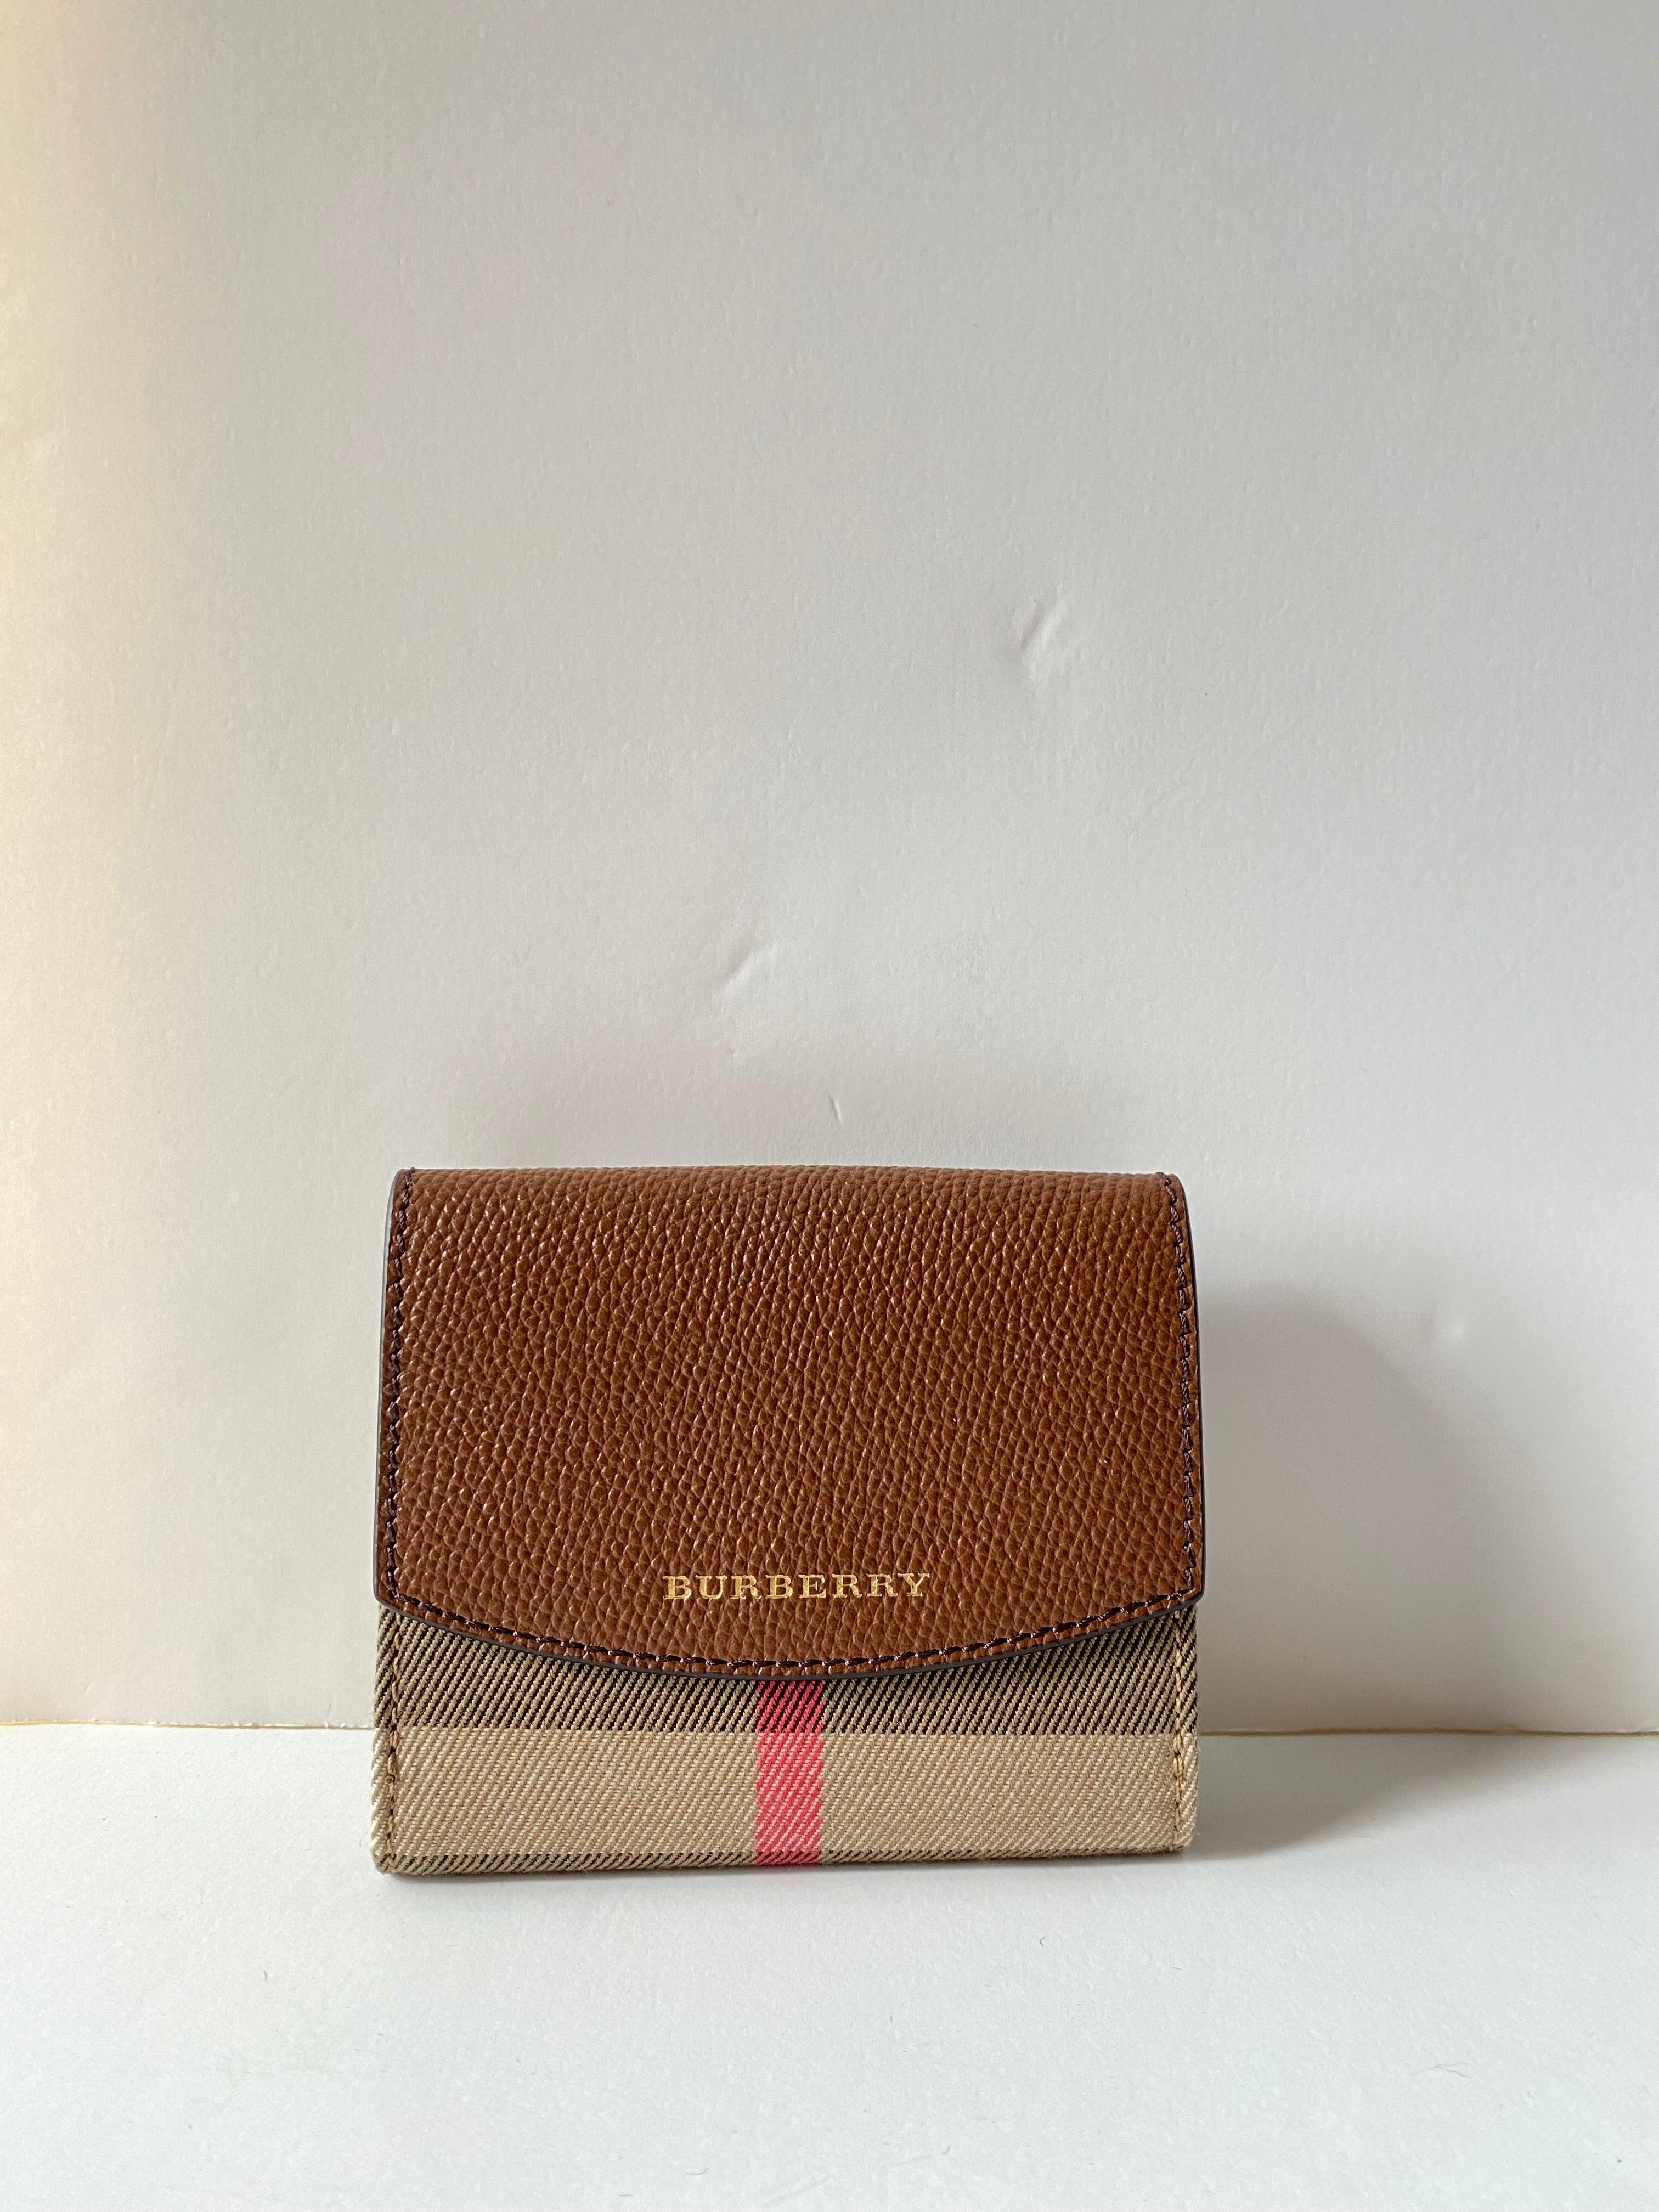 Burberry House Check Compact Wallet